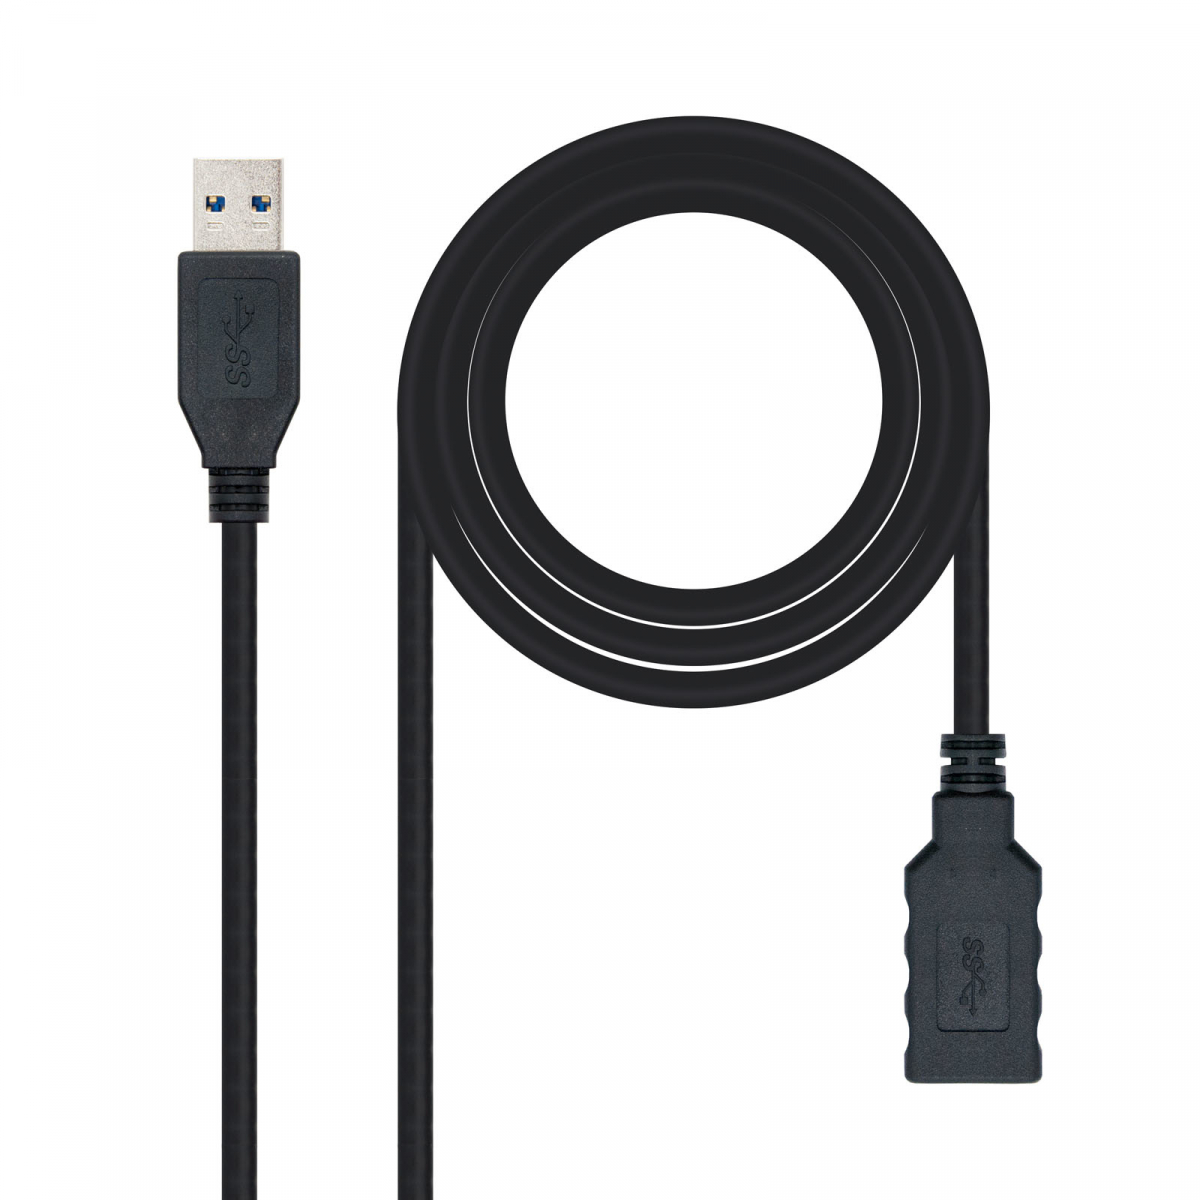 CABLE USB 3.0 TIPO A M/H 2M